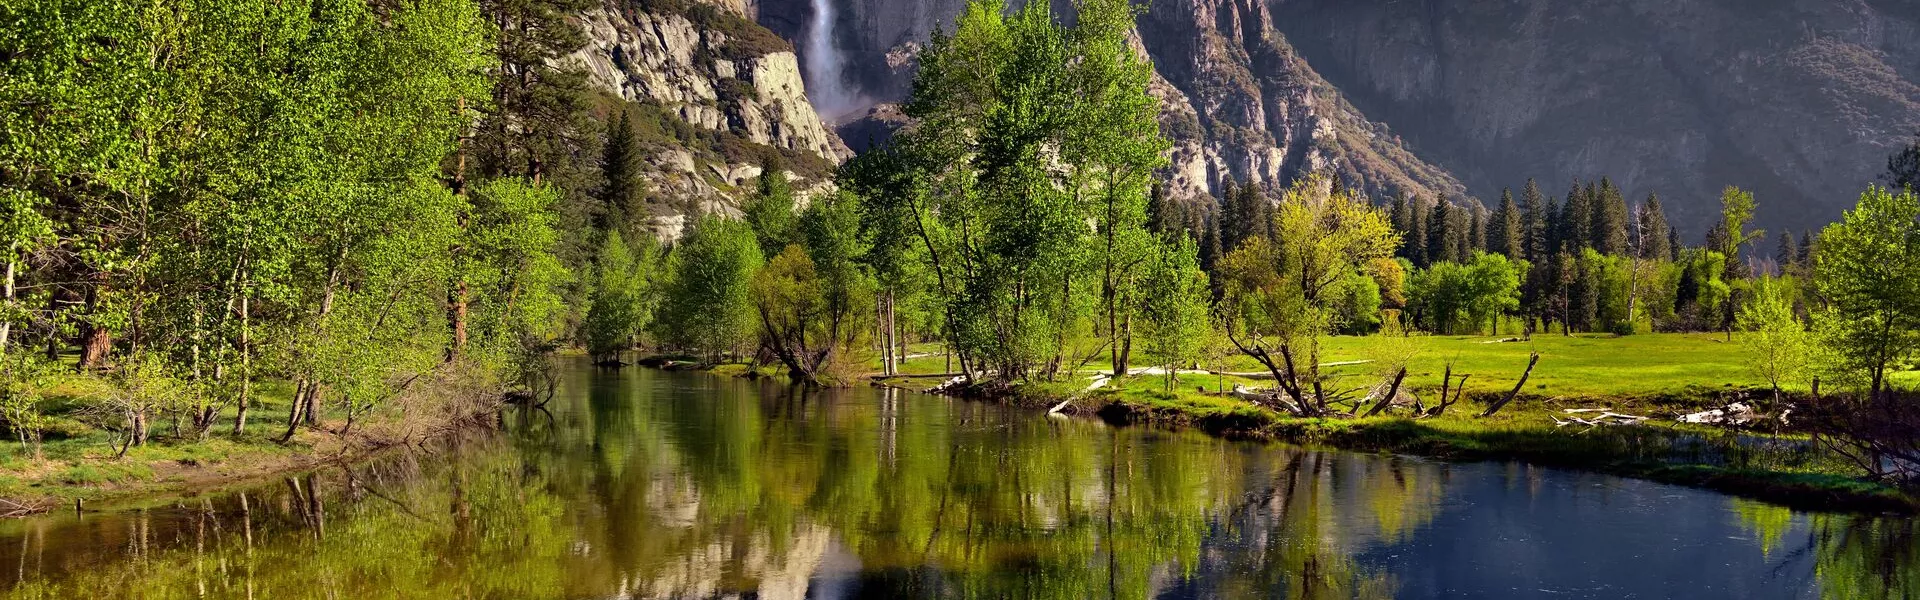 Reflections Of Yosemite Falls On The Merced River